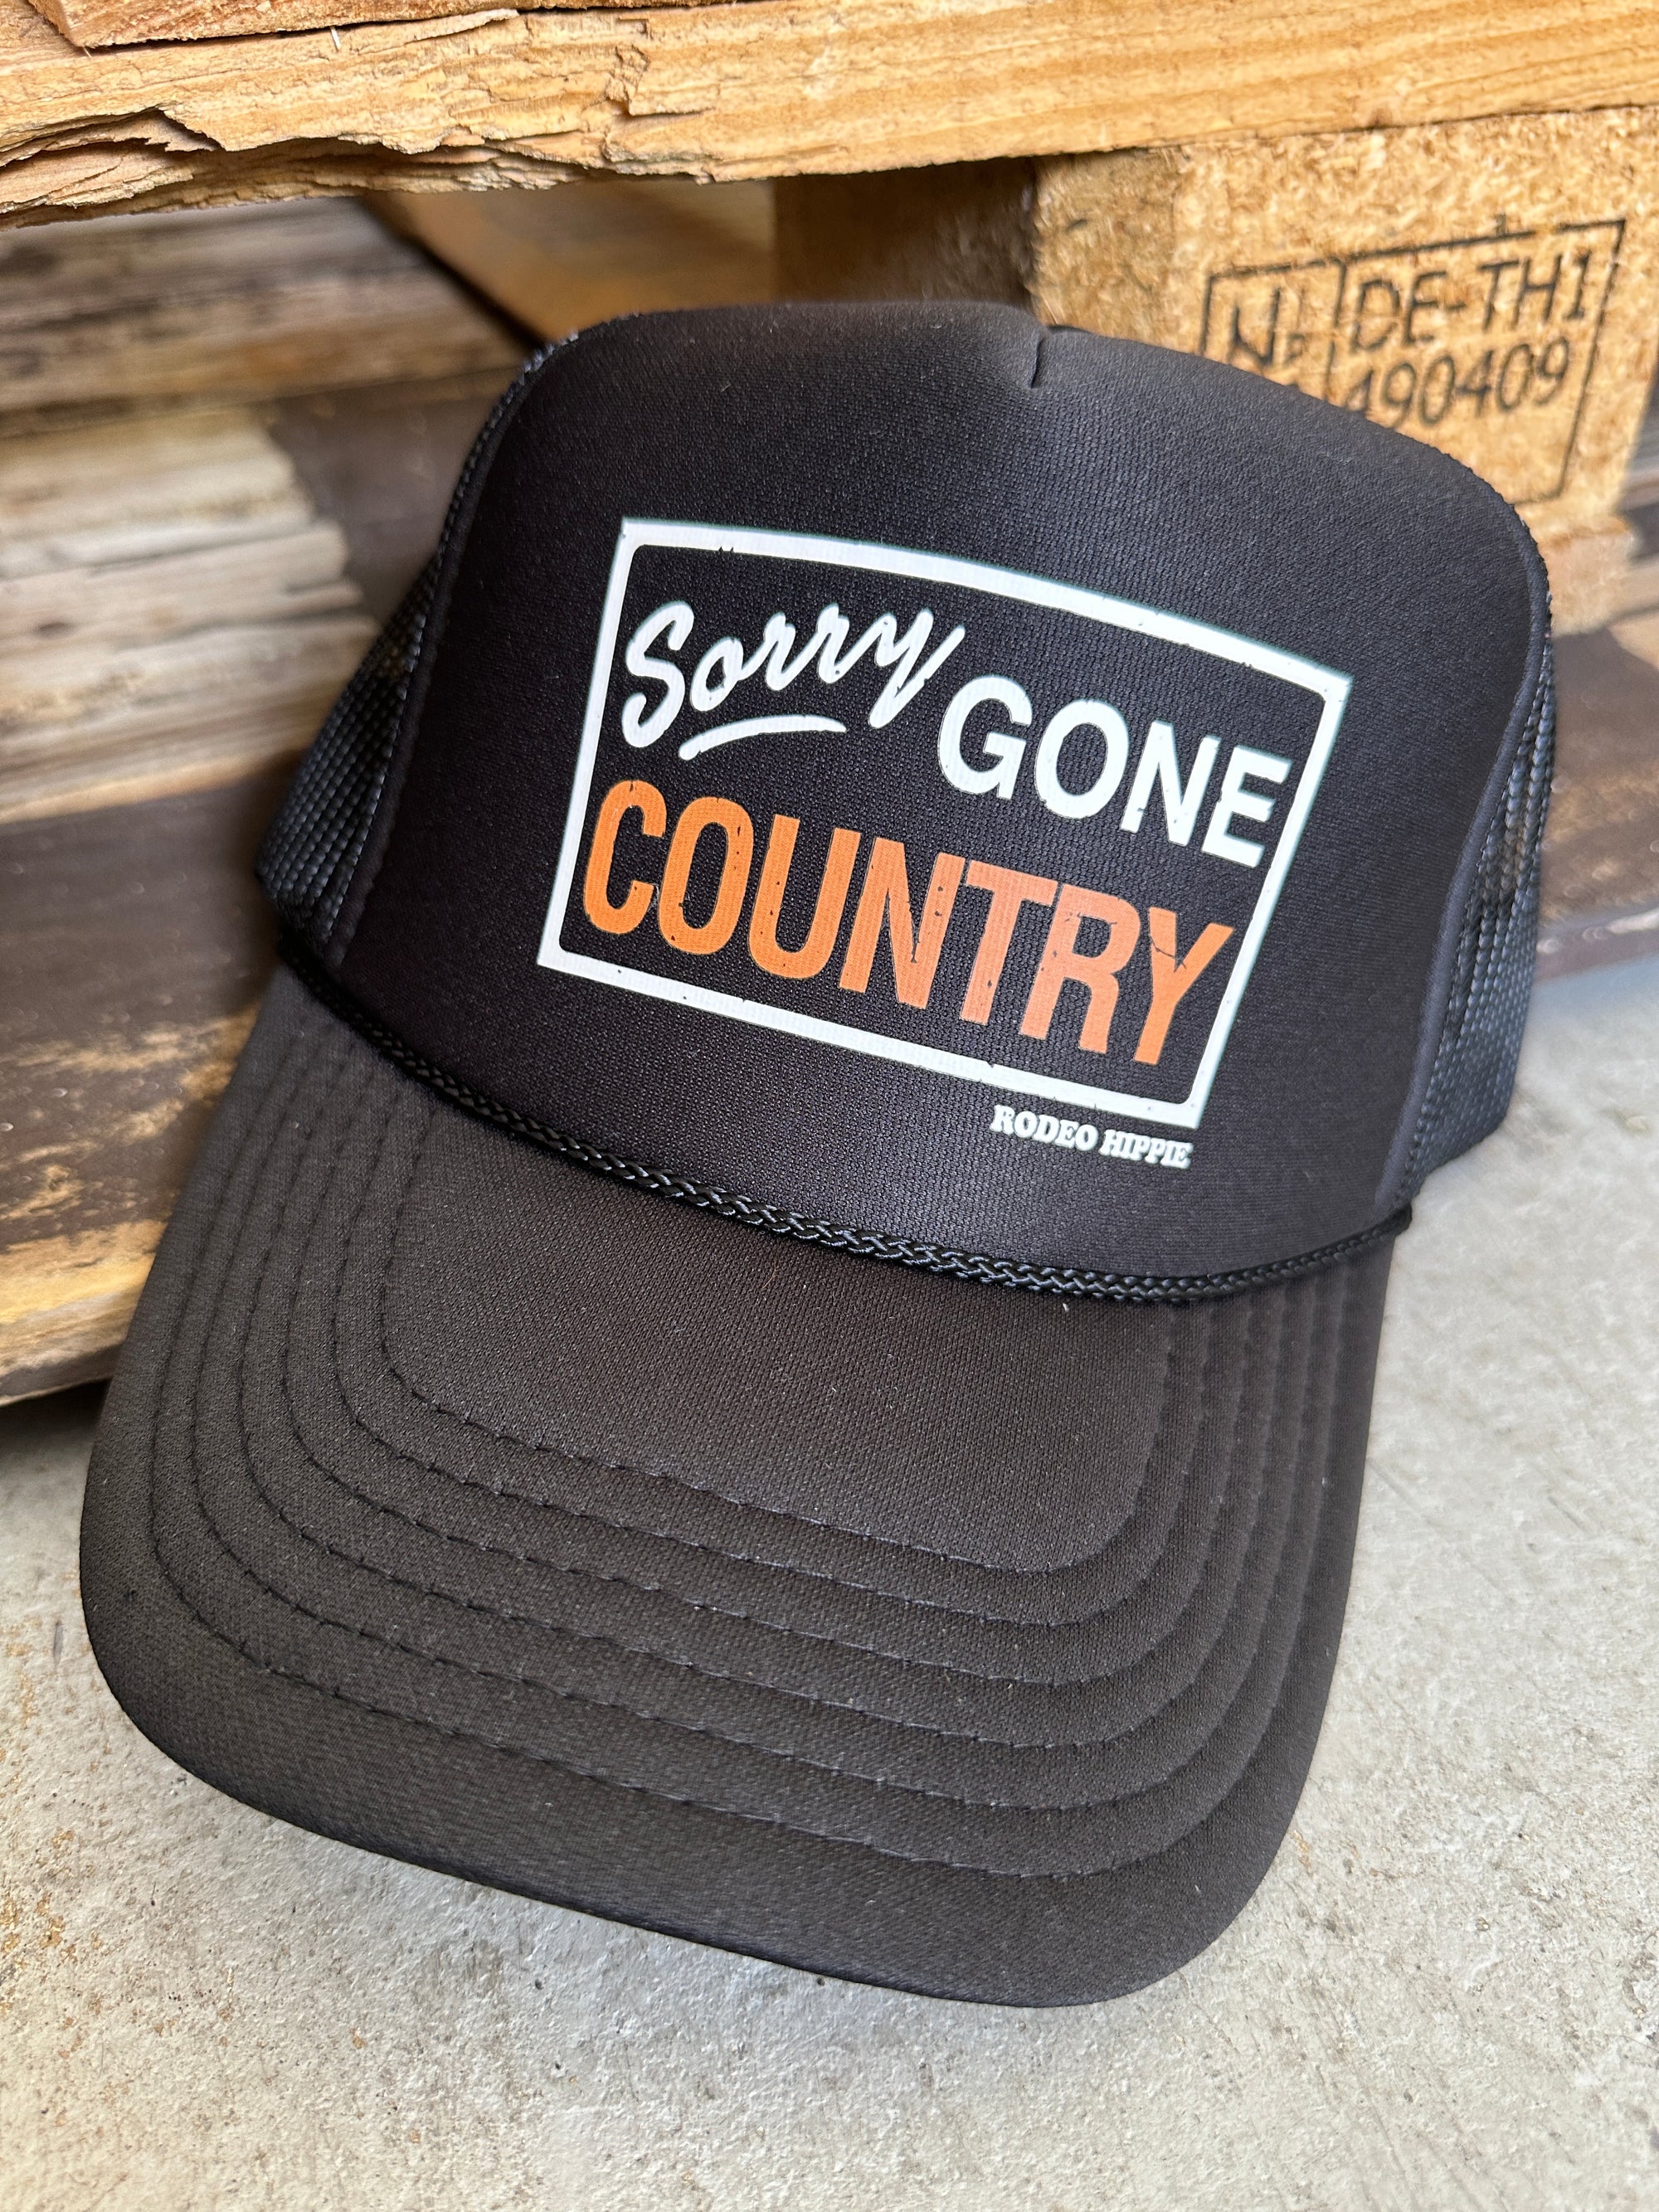 Sorry Gone COUNTRY Snap Back Trucker Hats